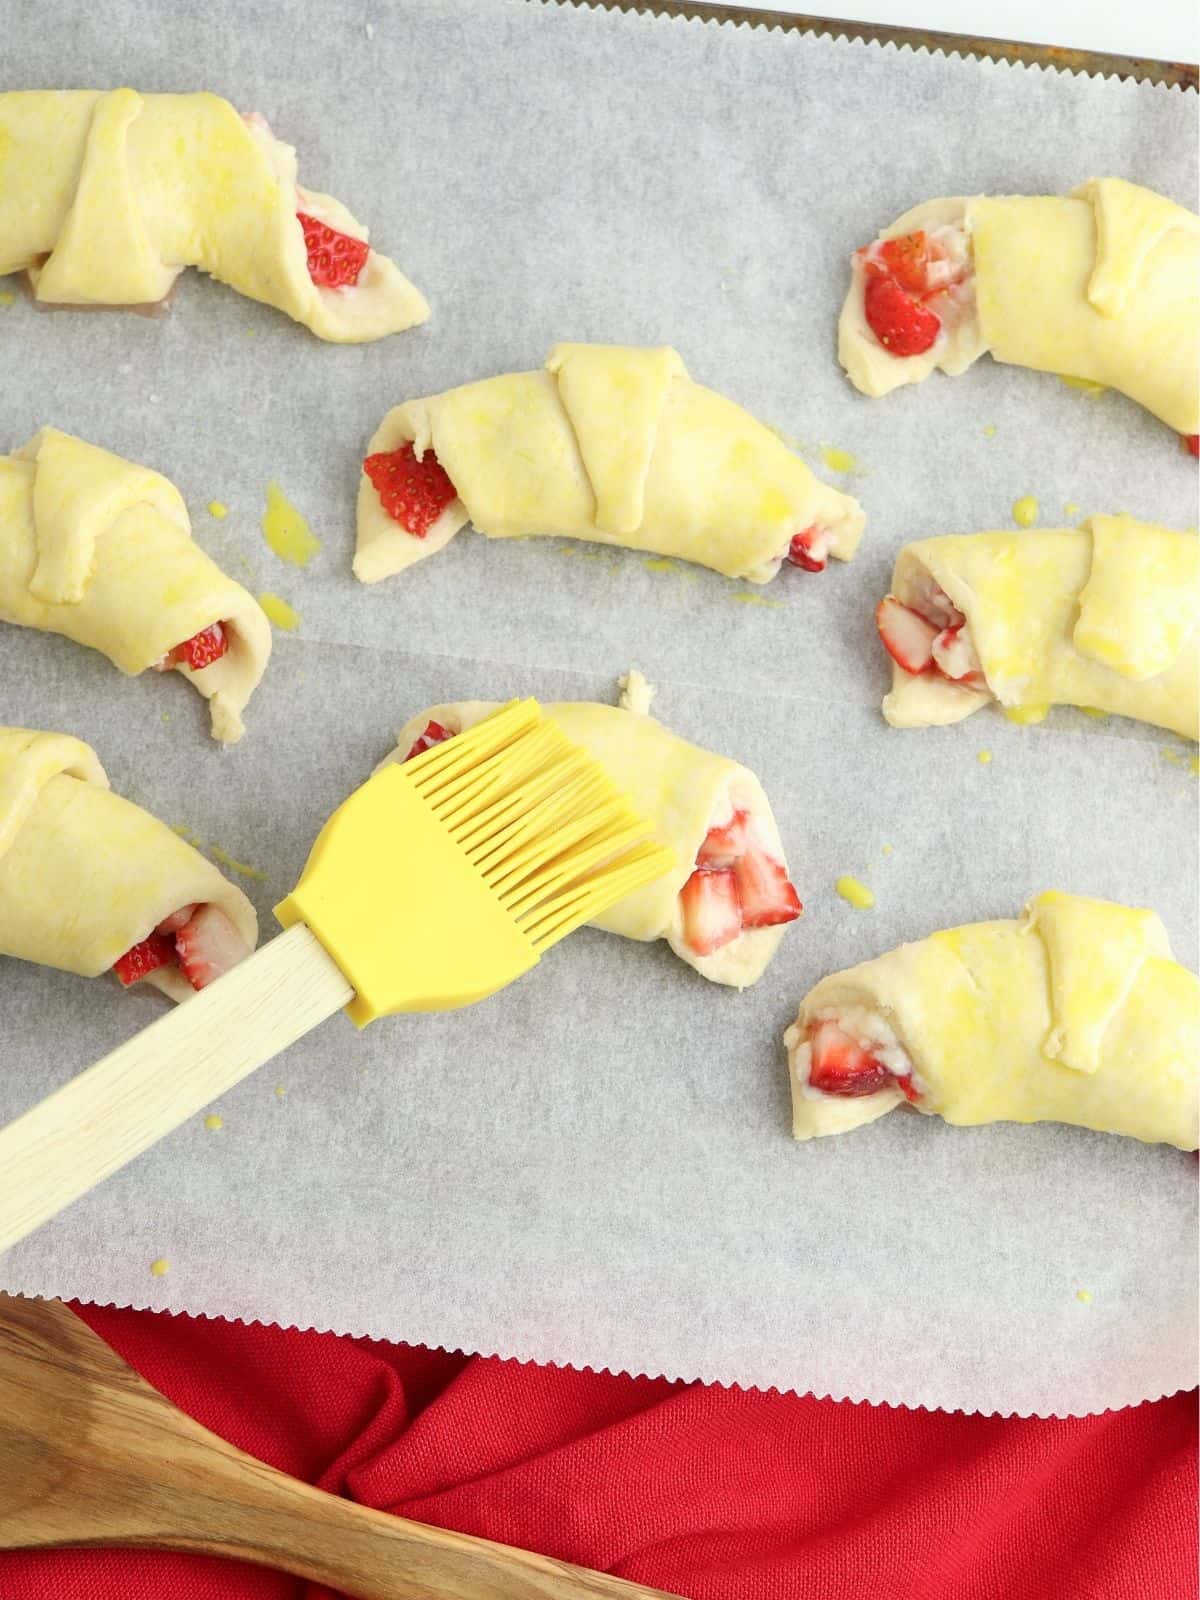 Raw crescent rolls with strawberries on baking tray.